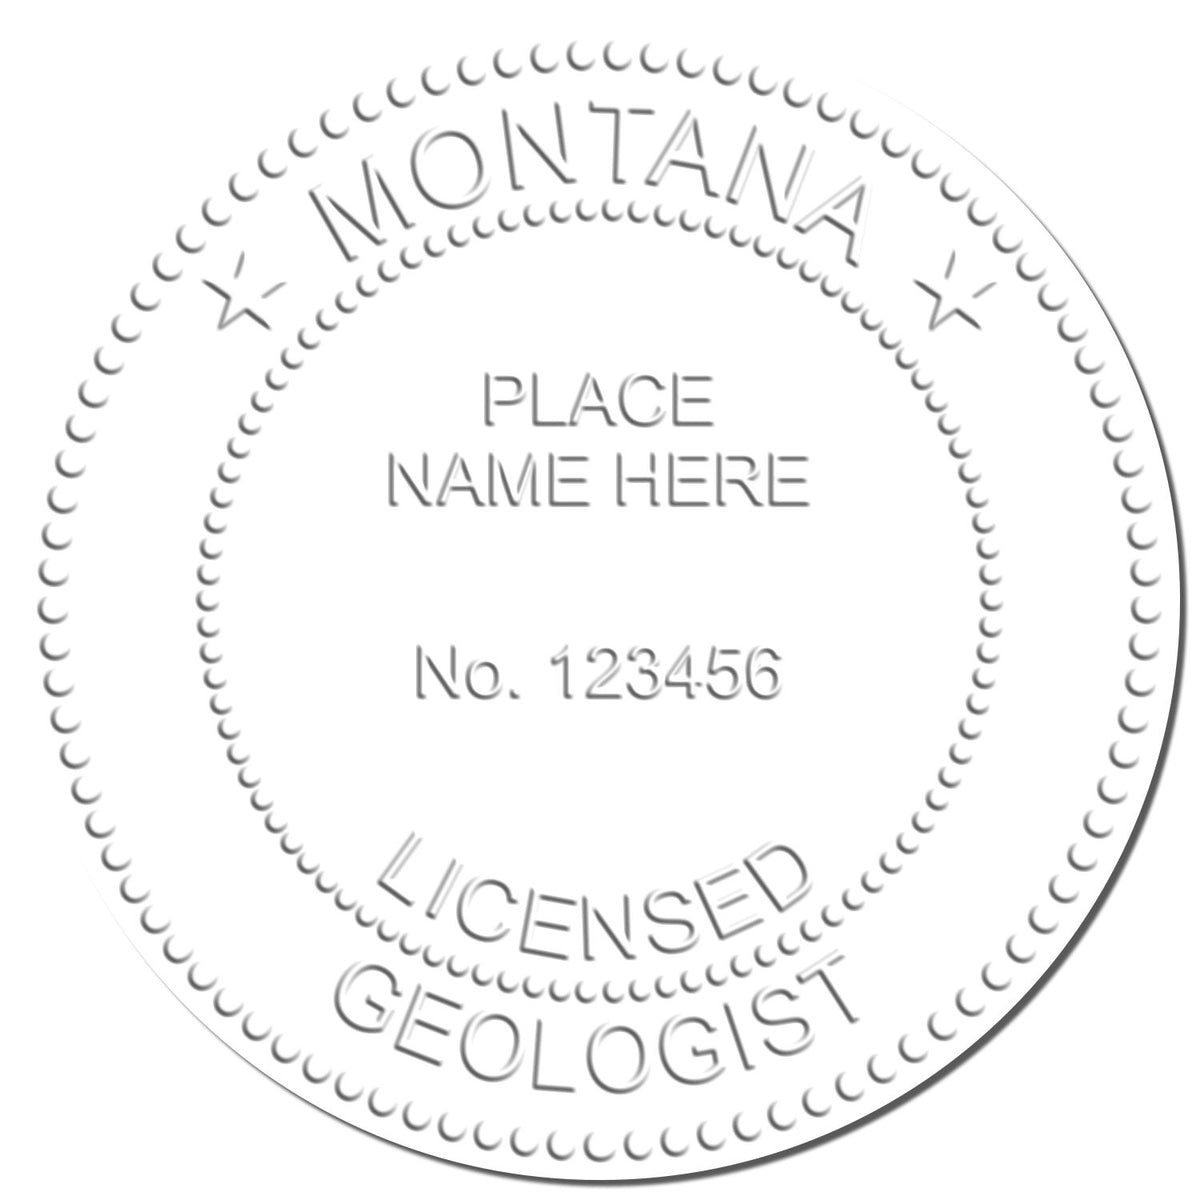 The Montana Geologist Desk Seal stamp impression comes to life with a crisp, detailed image stamped on paper - showcasing true professional quality.